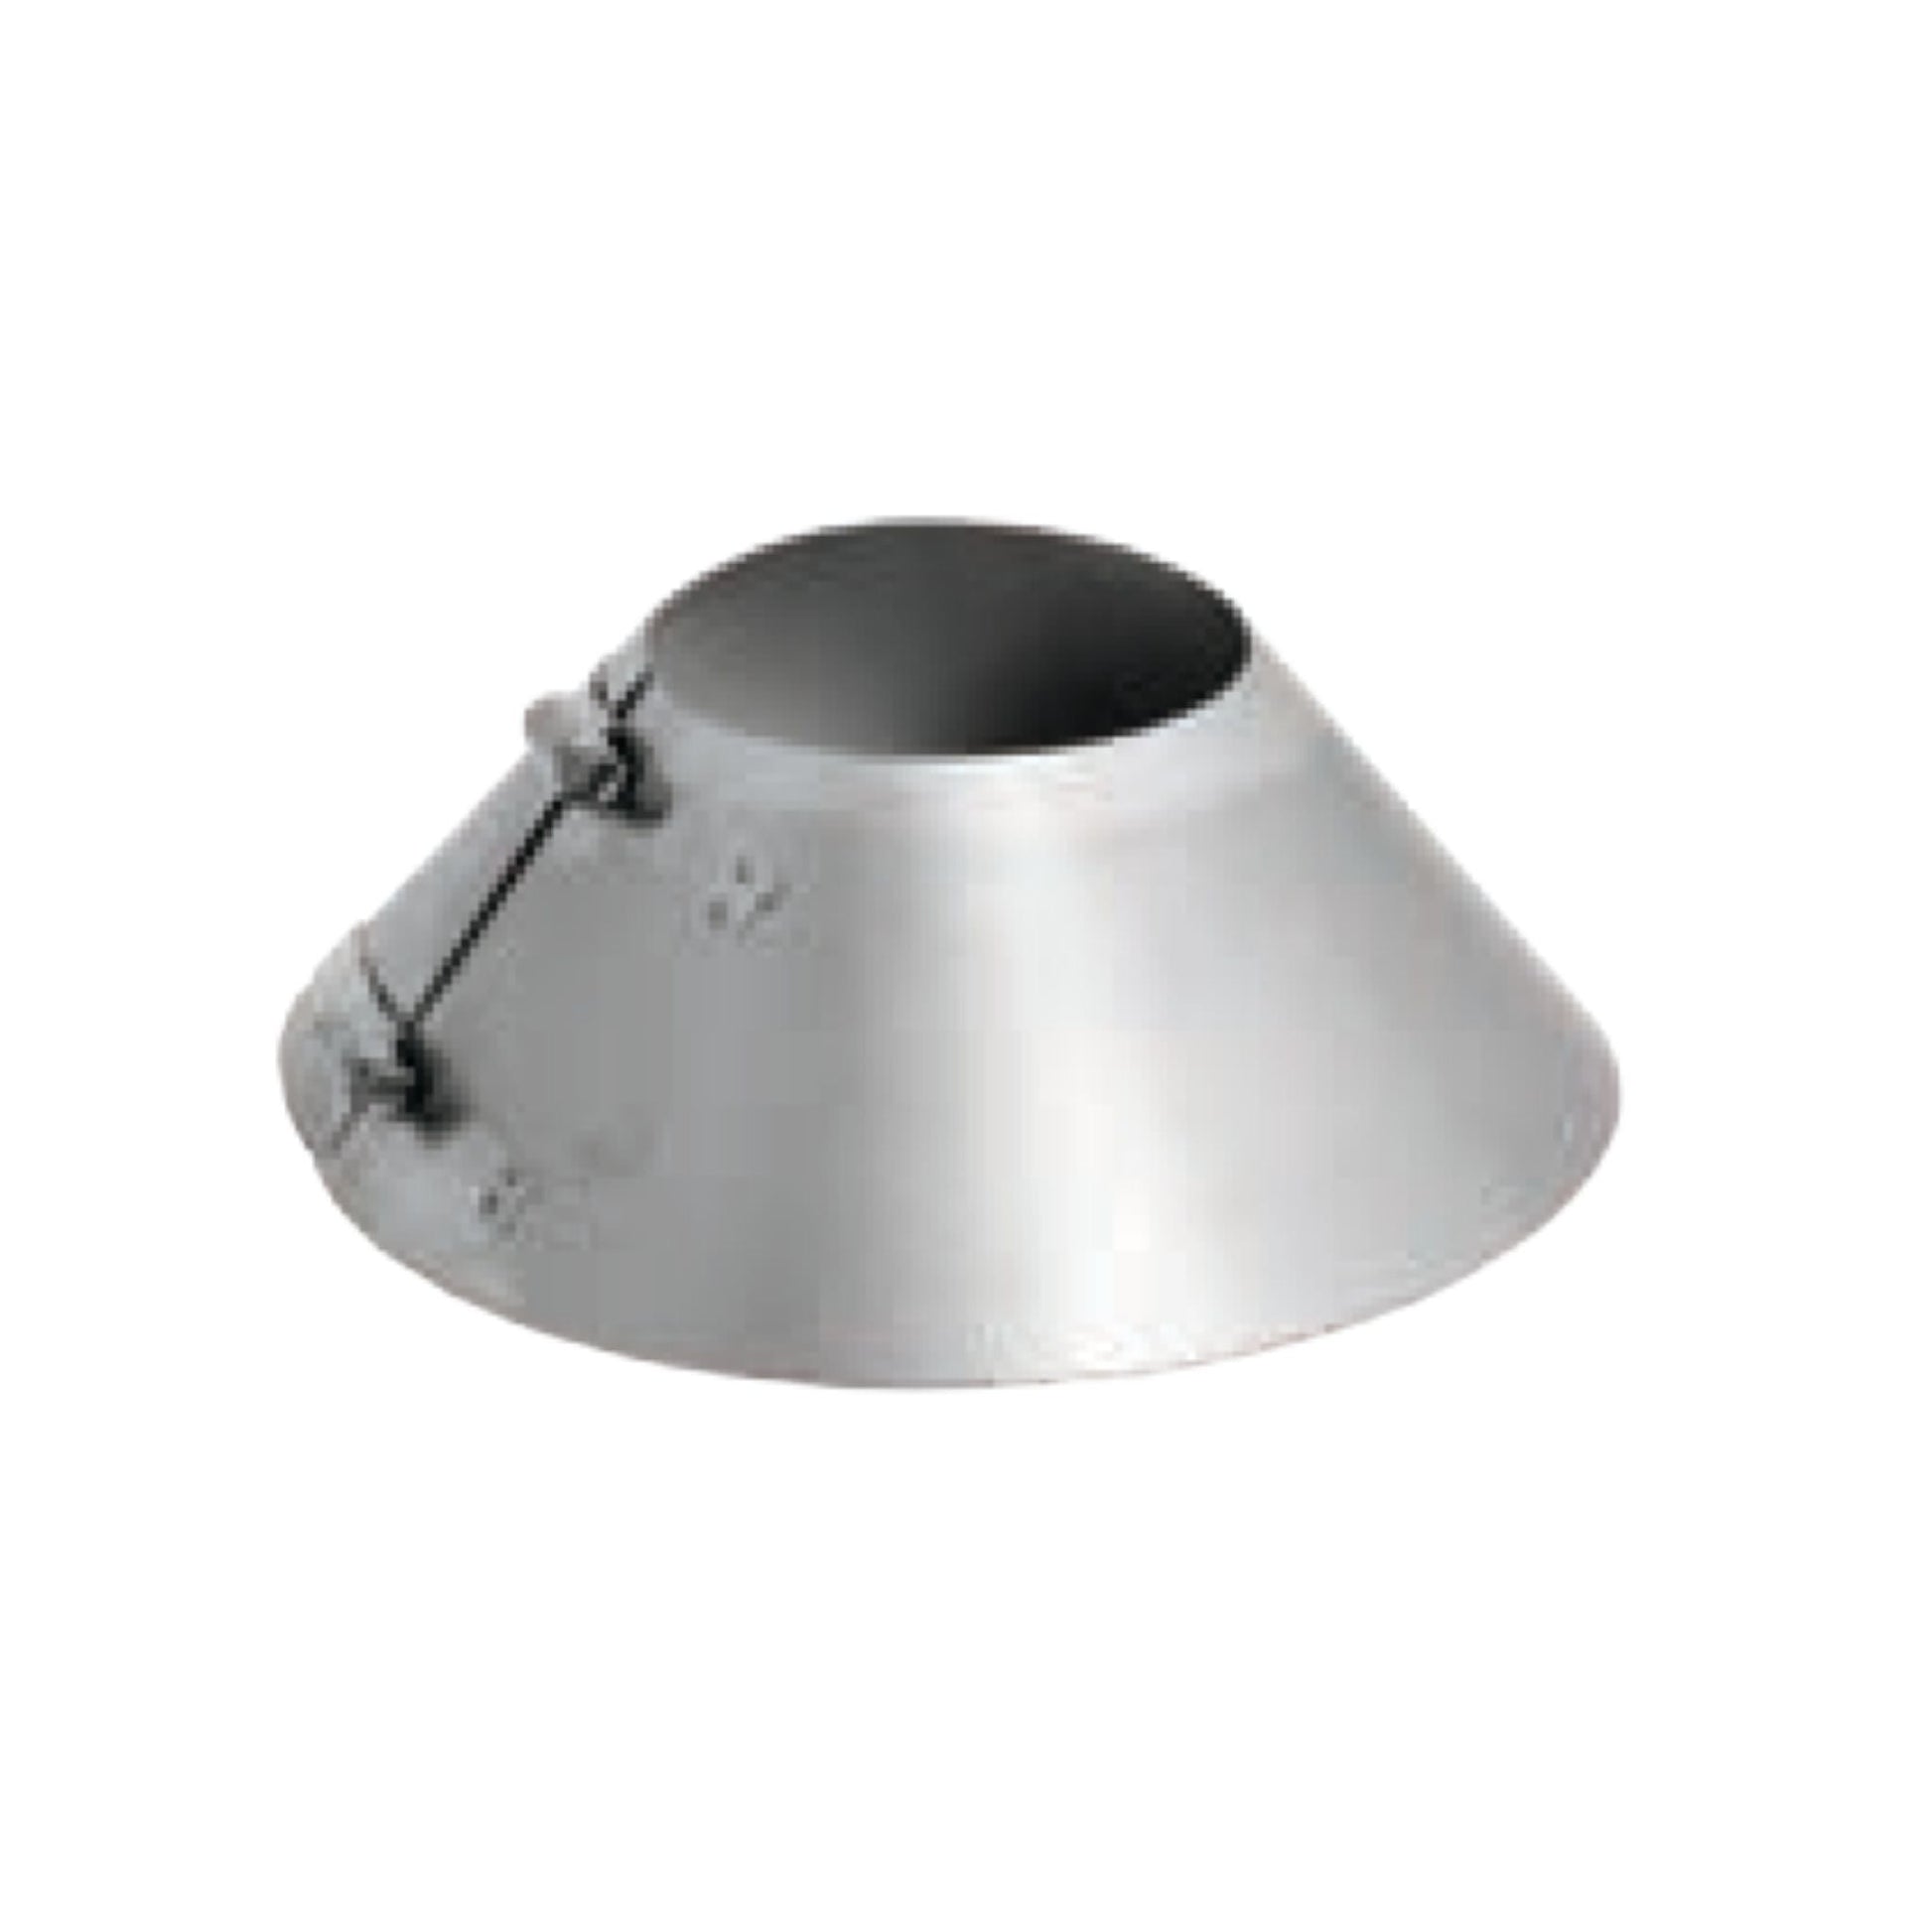 DuraVent FasNSeal 5" 29-4C Stainless Steel Storm Collar